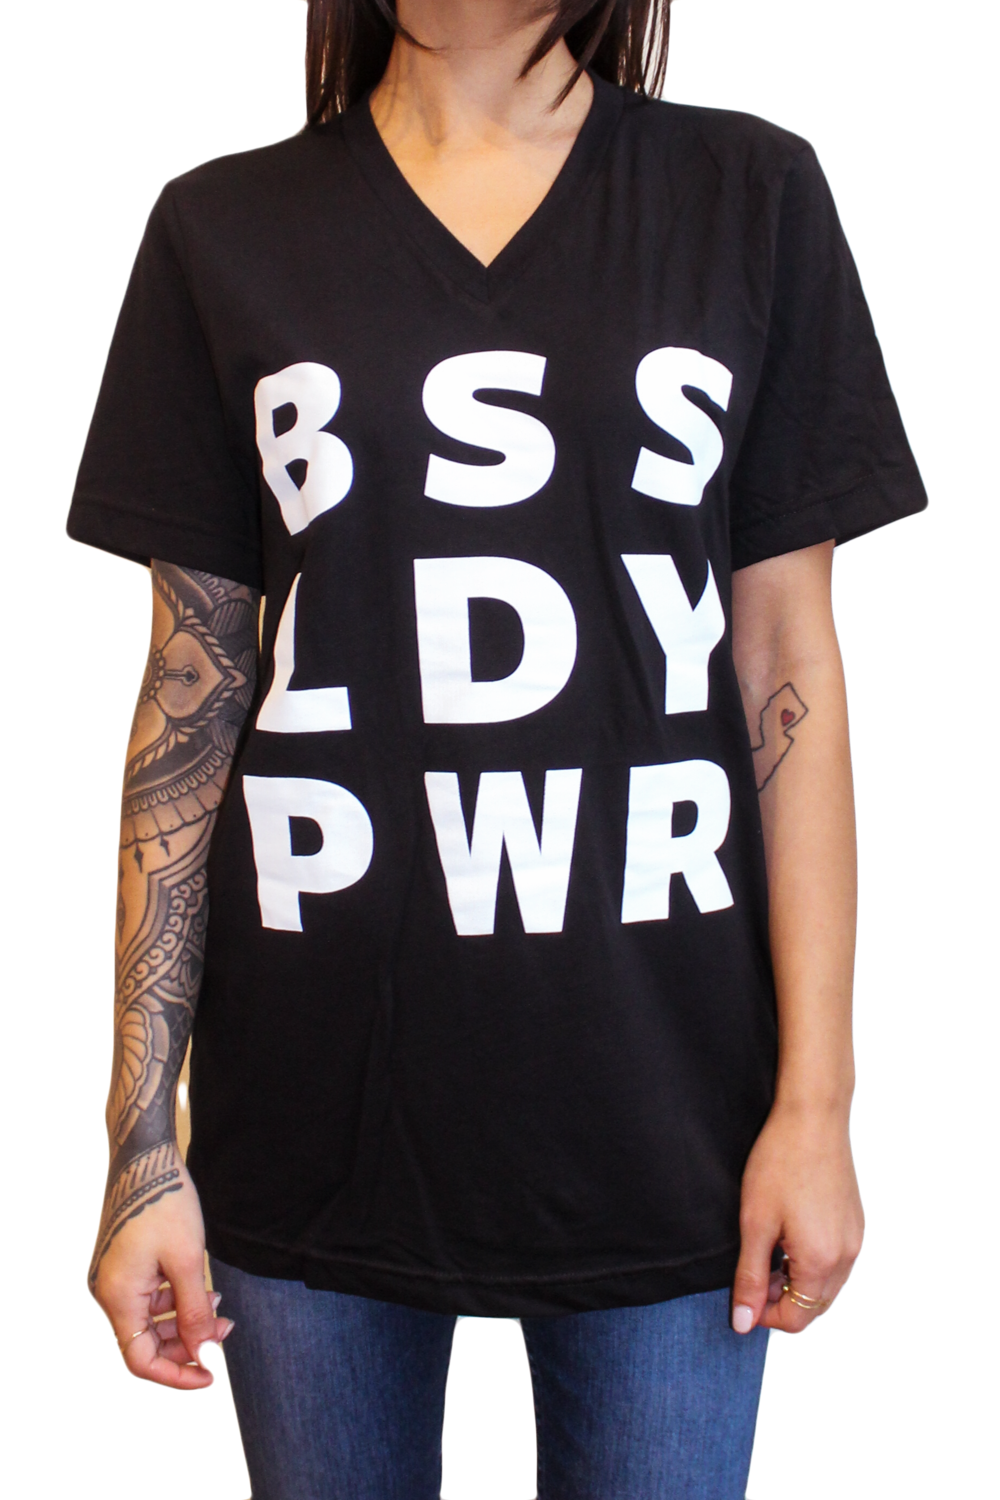 BSS LDY PWR V-neck Tee